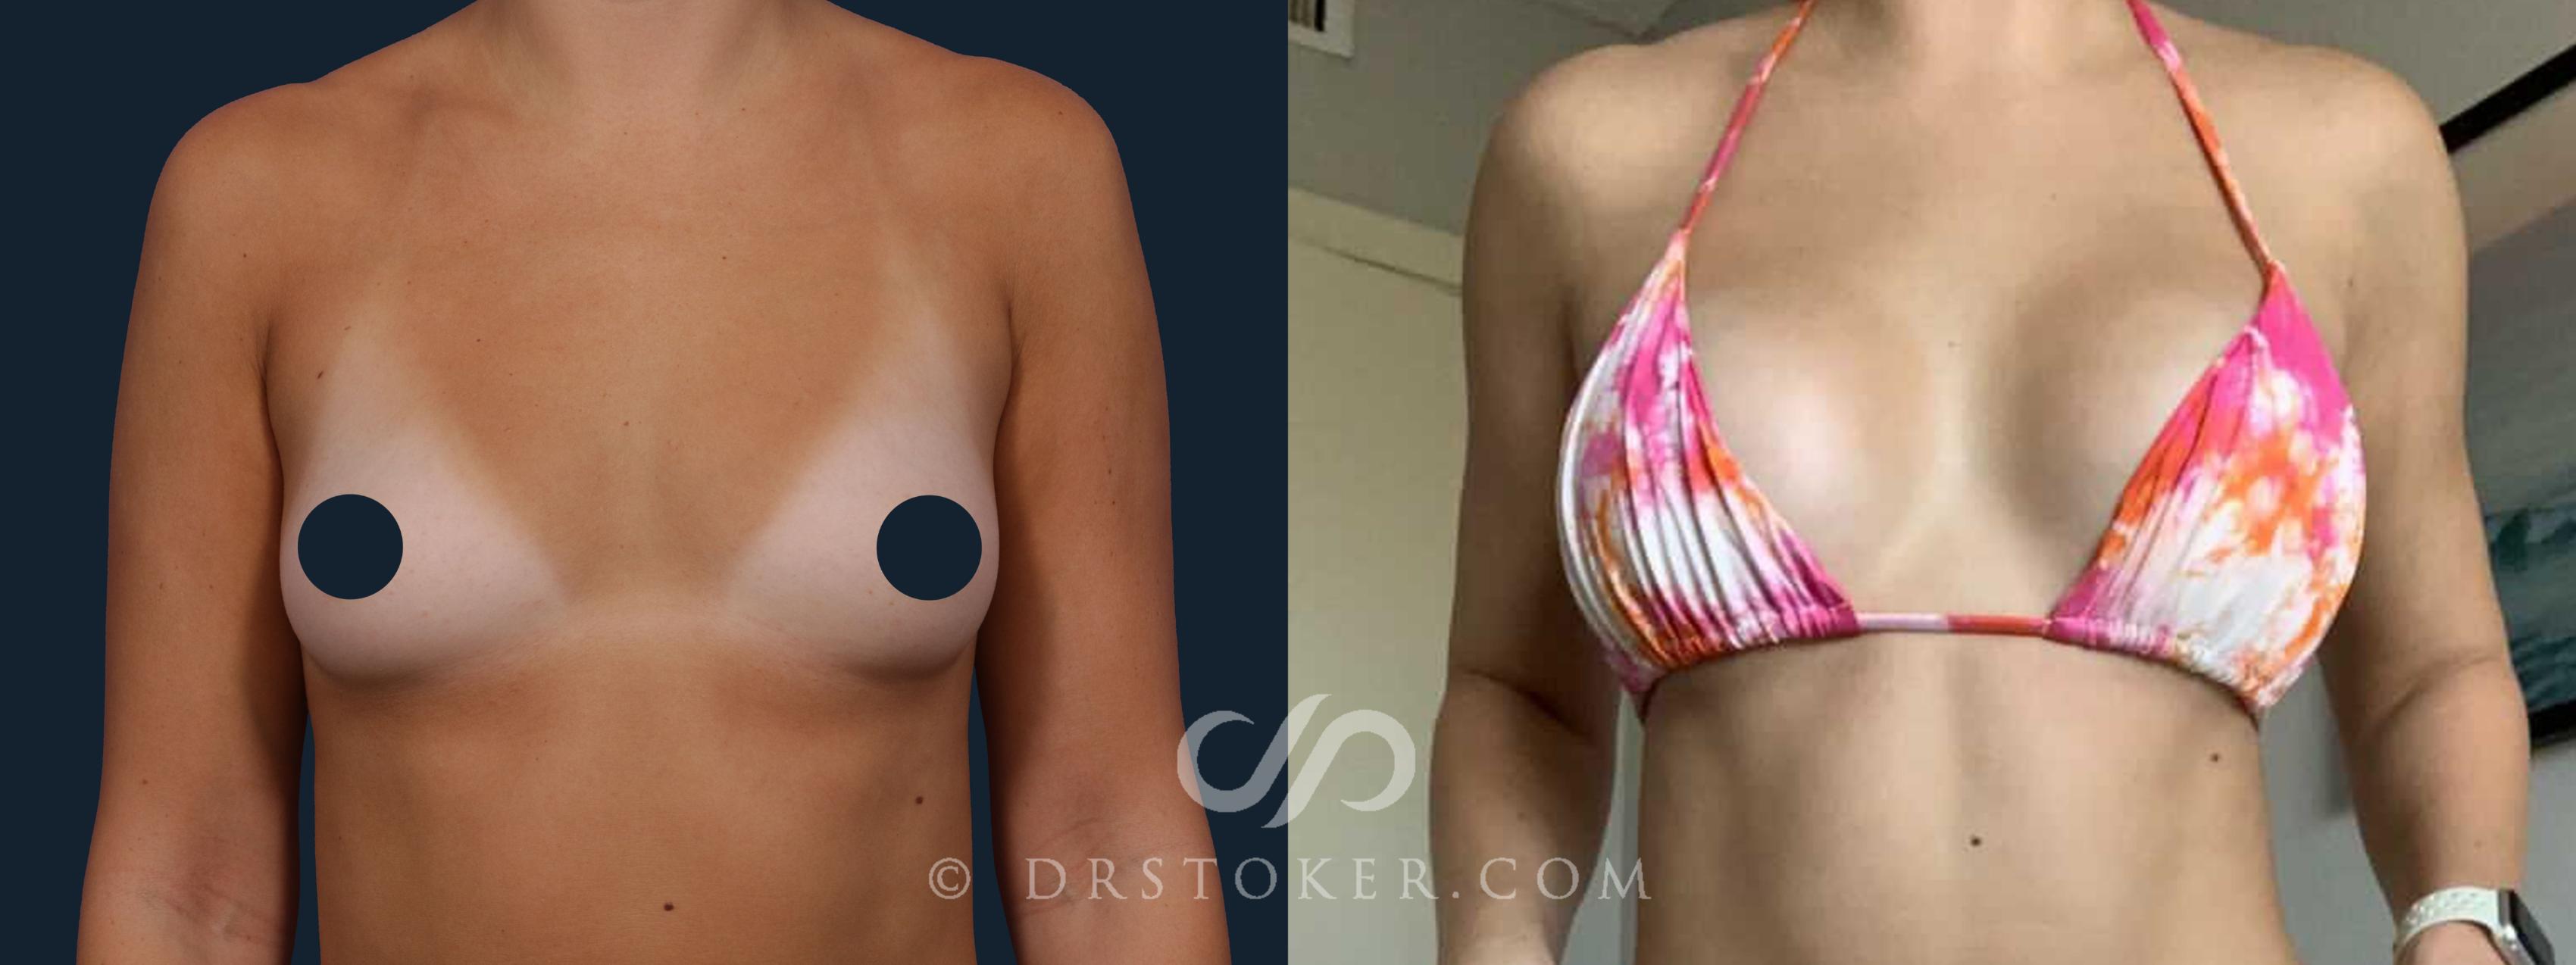 Rapid Recovery Breast Augmentation Before and After Pictures Case 1793, Los Angeles, CA